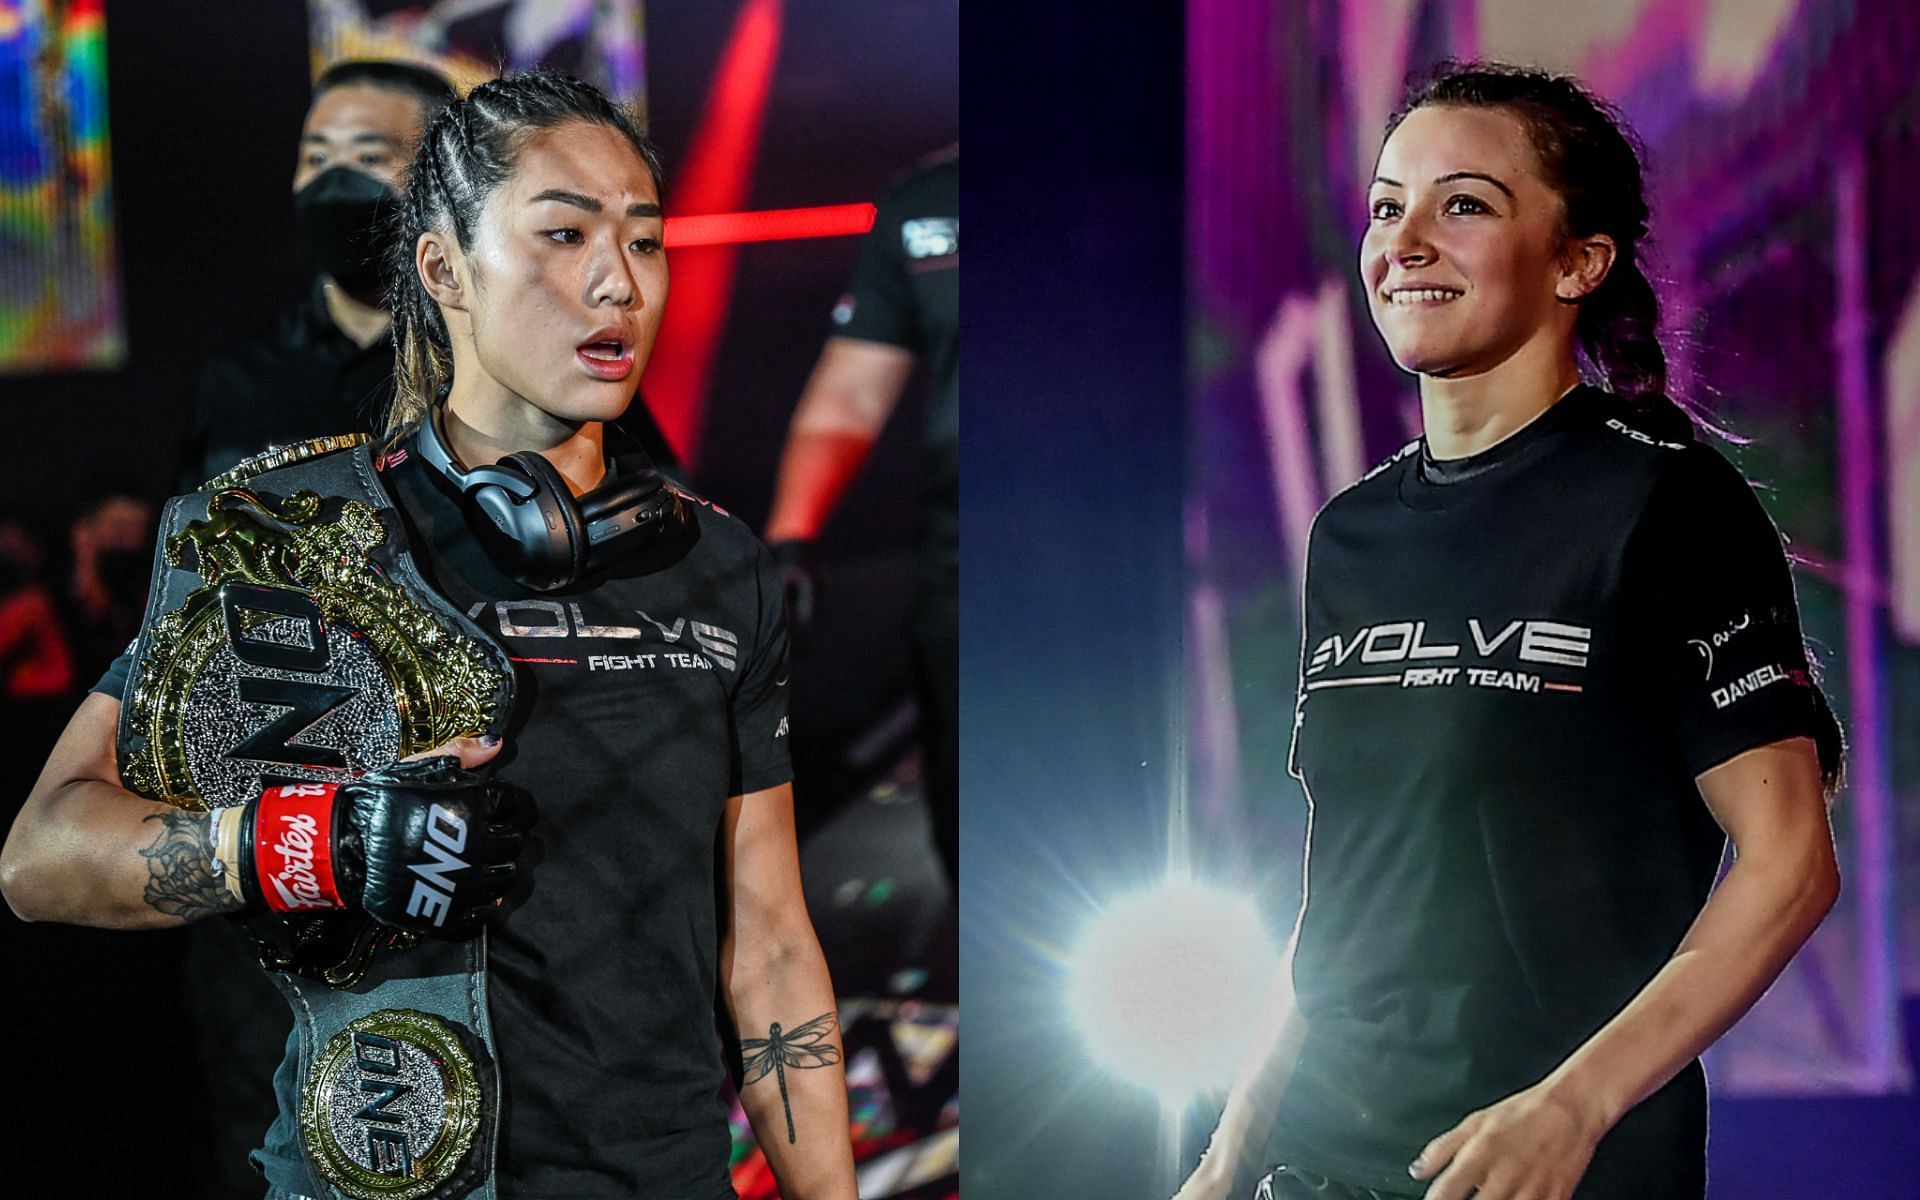 Angela Lee (left) says she would love to have a grappling match against Danielle Kelly (right). [Photos ONE Championship]